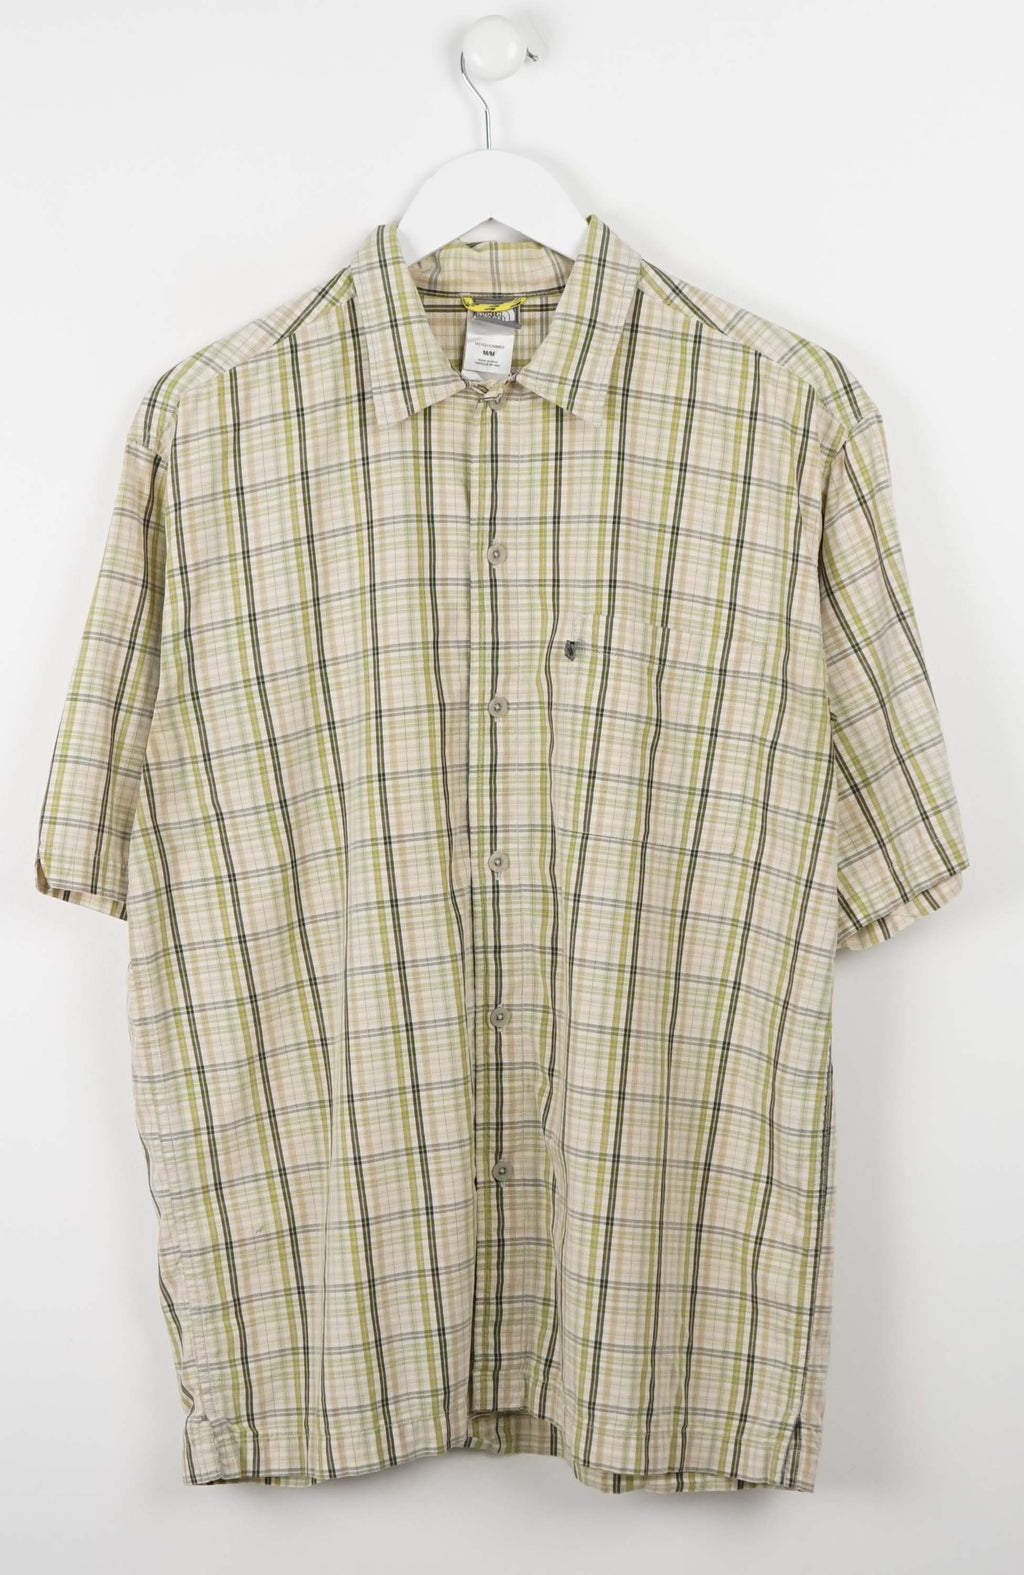 VINTAGE THE NORTH FACE SHIRT (M) 